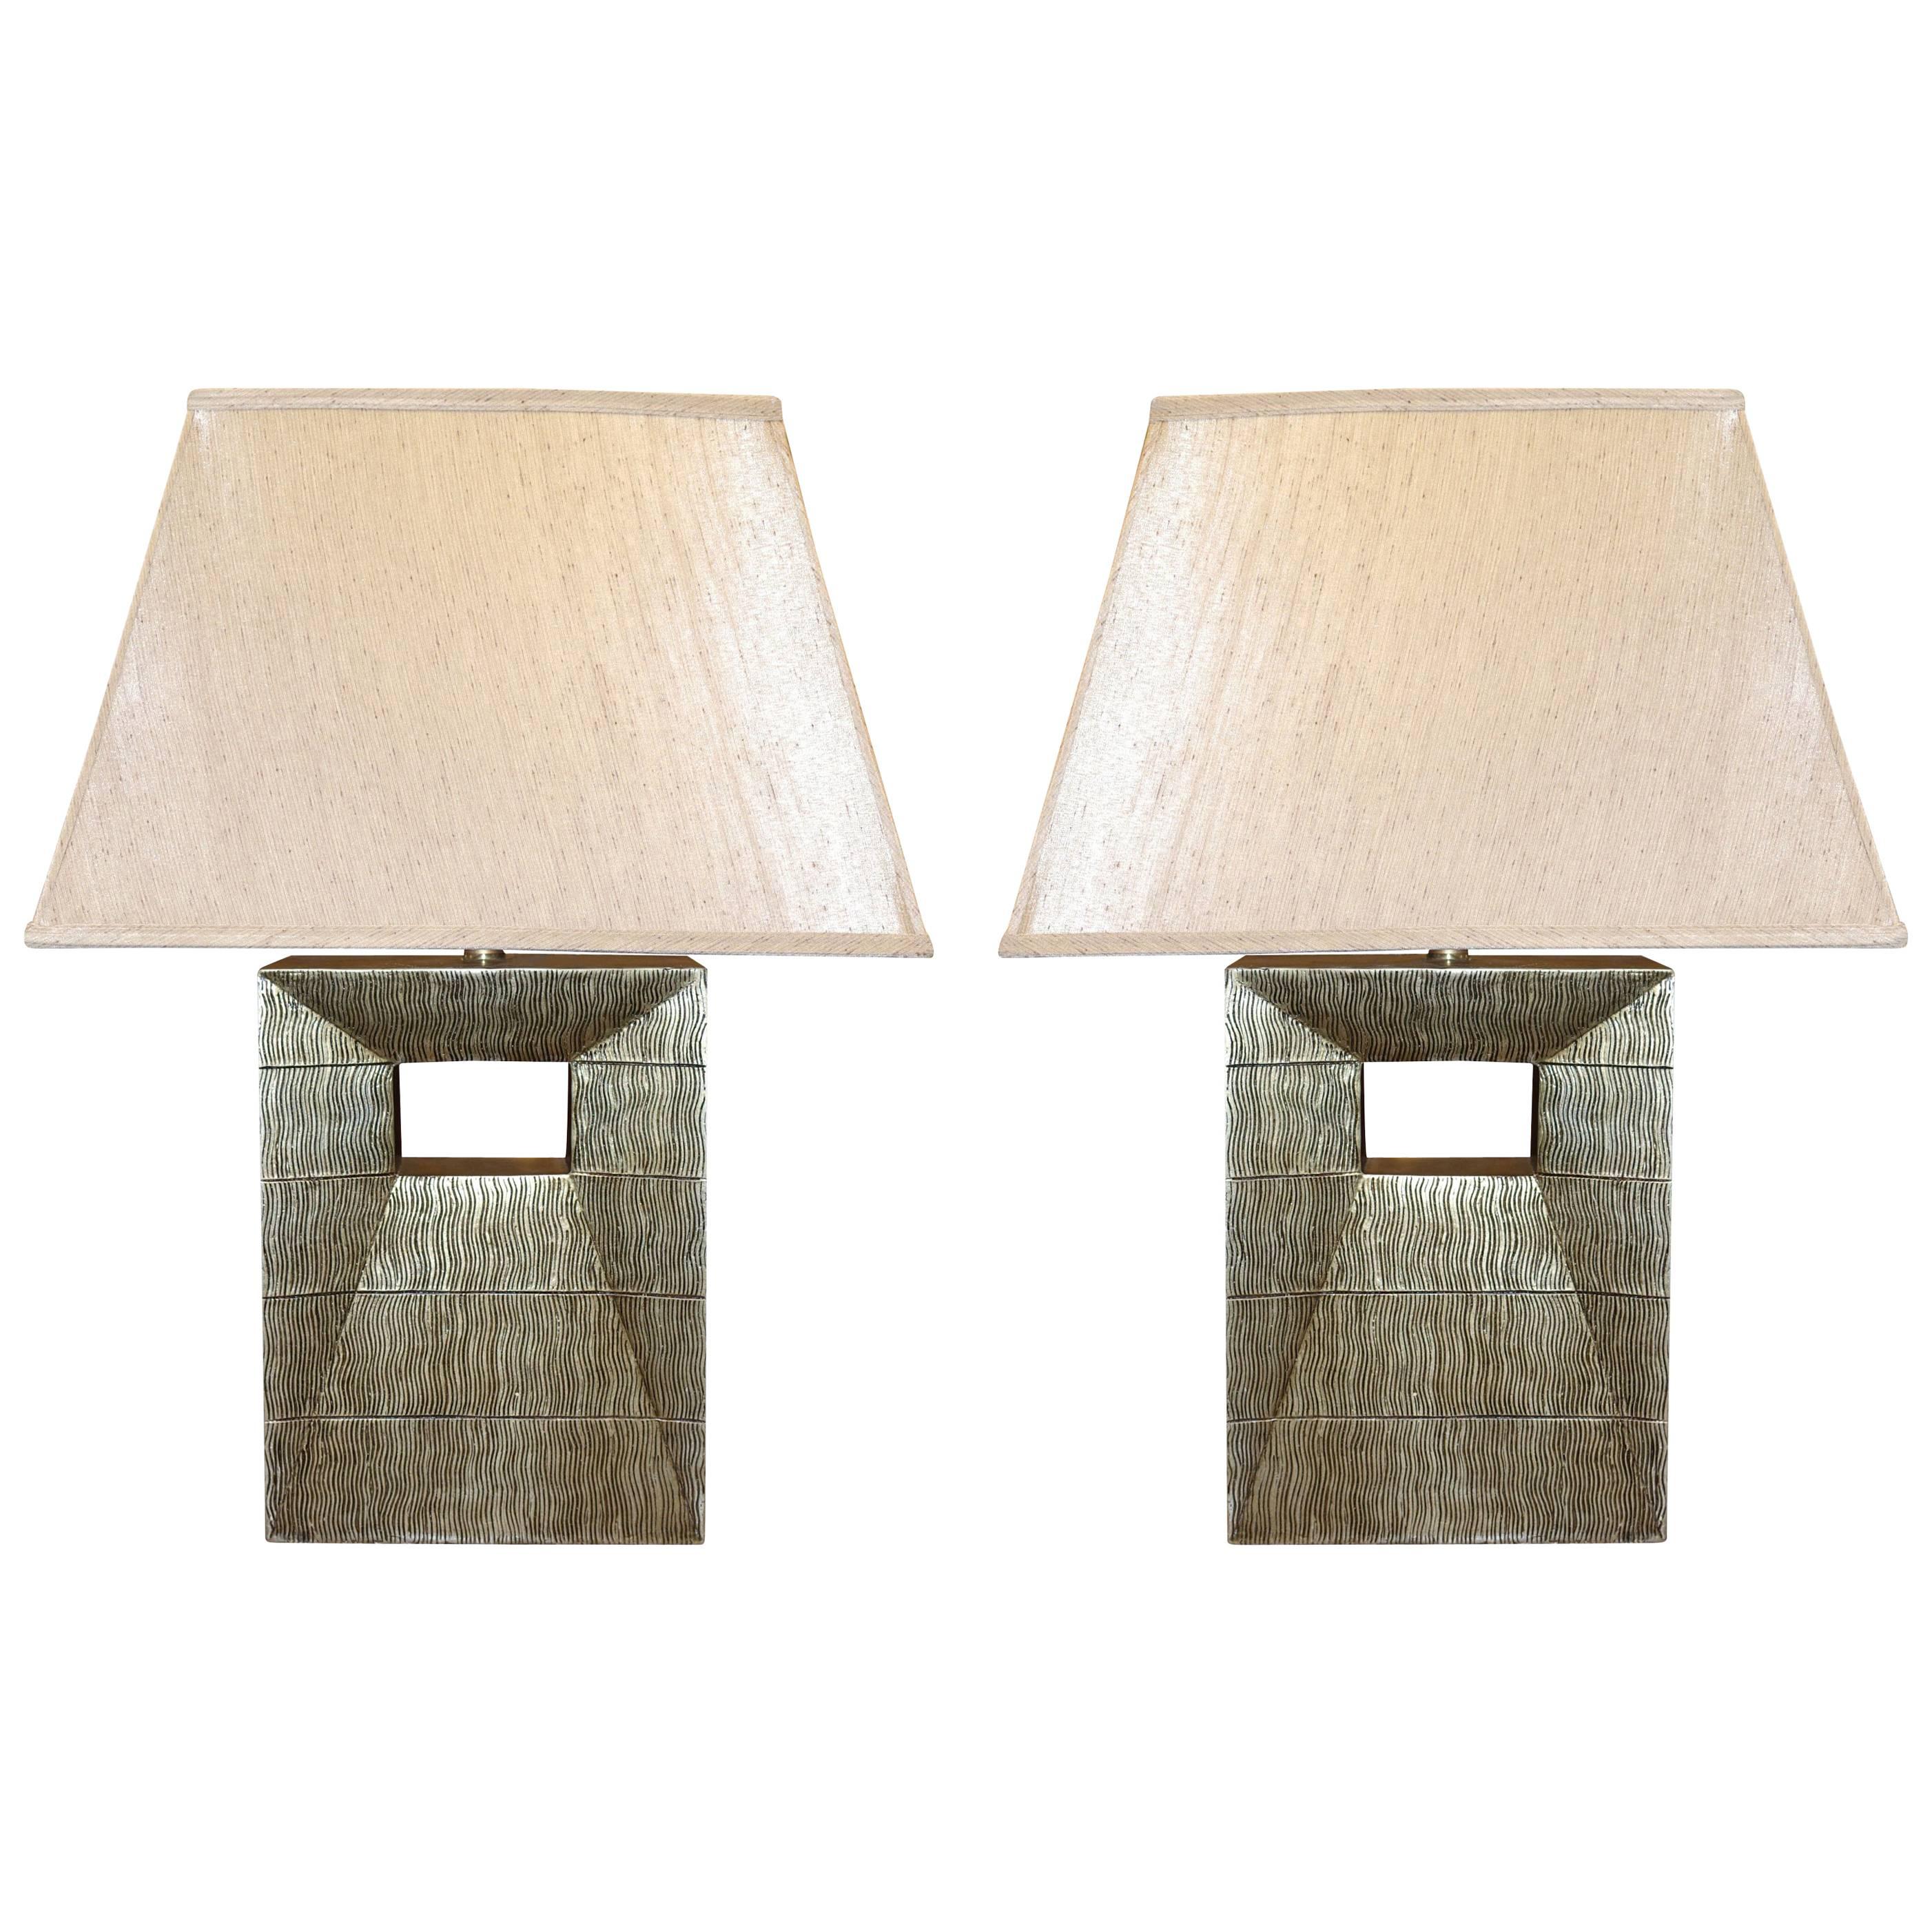 Pair of Black/Gold Cut Out Base Lamps, Italy, Contemporary